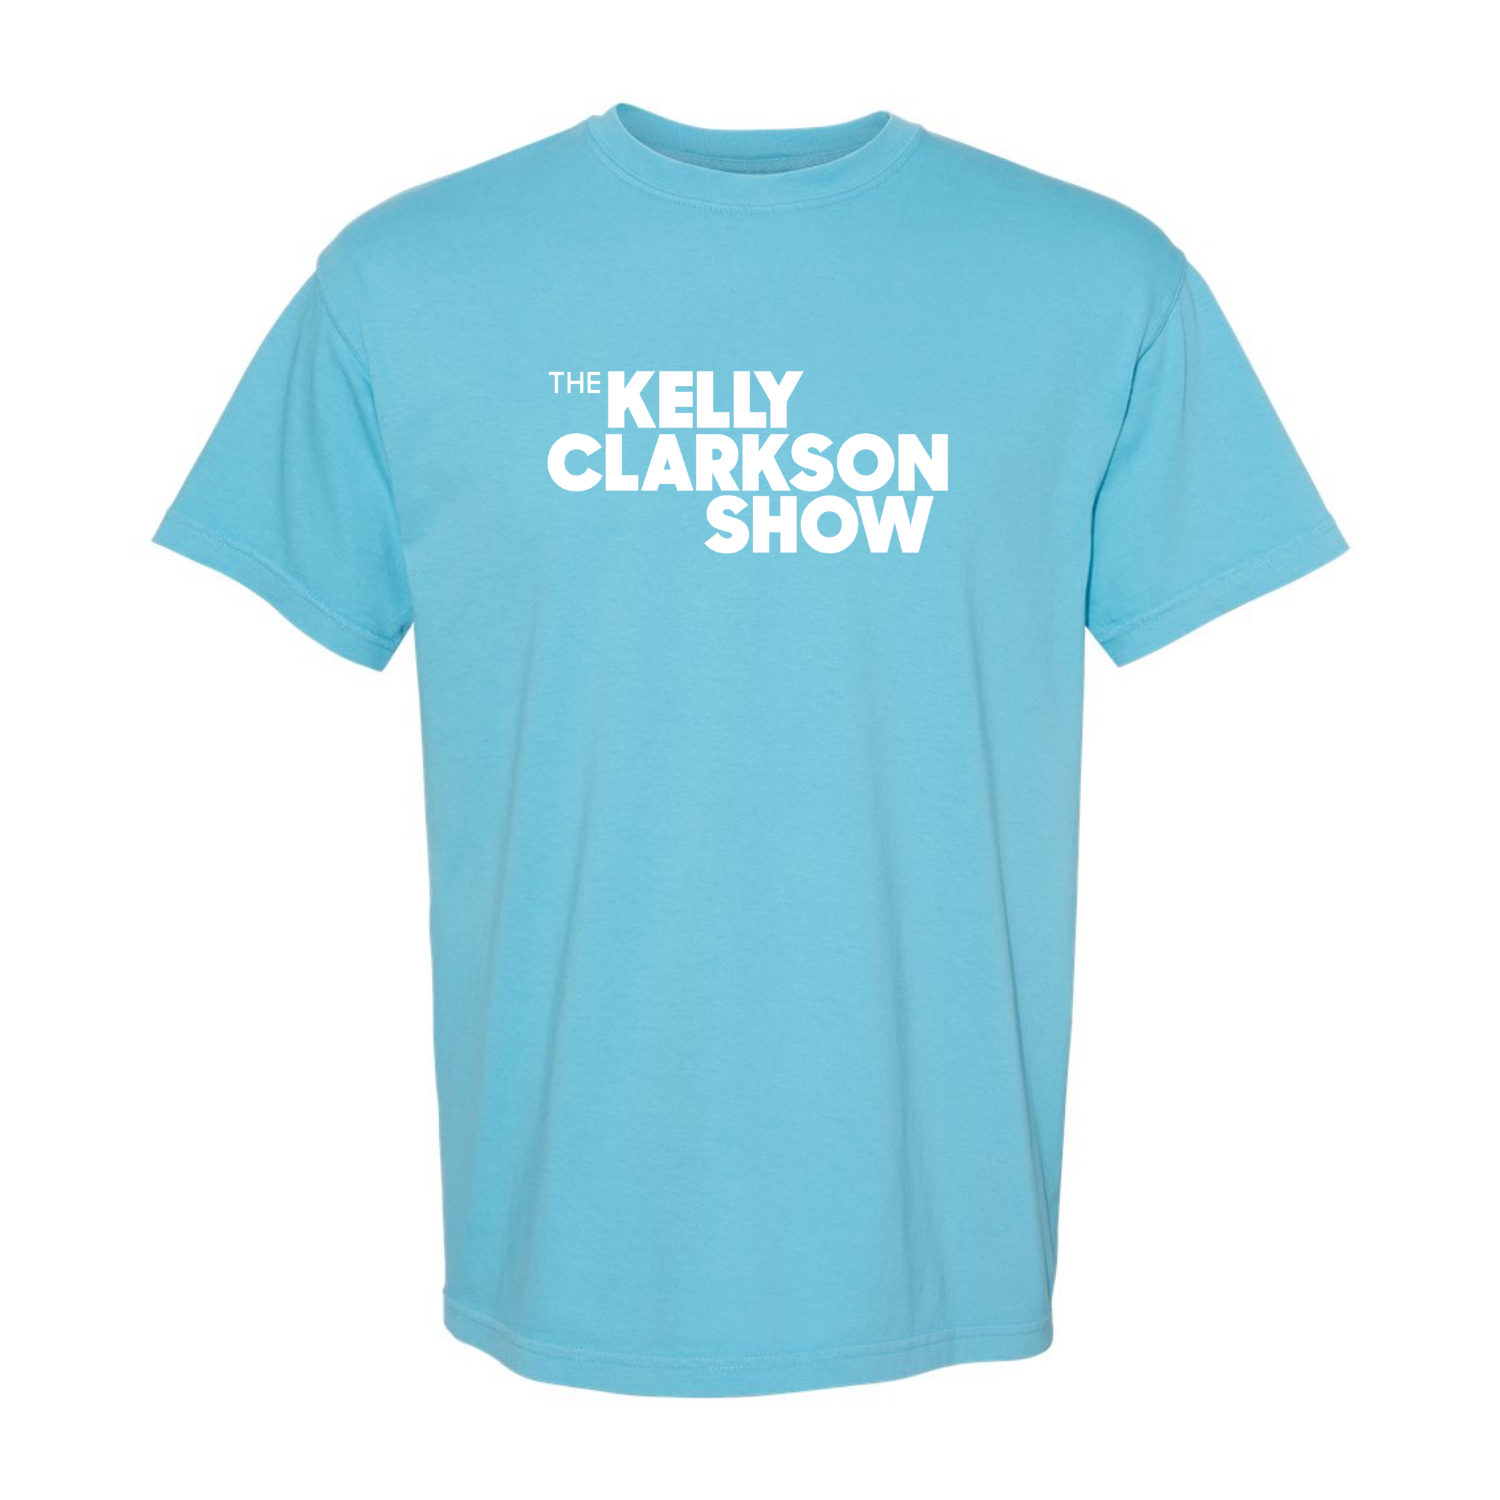 The Kelly Clarkson Show Garment-Dyed T-Shirt - Sapphire